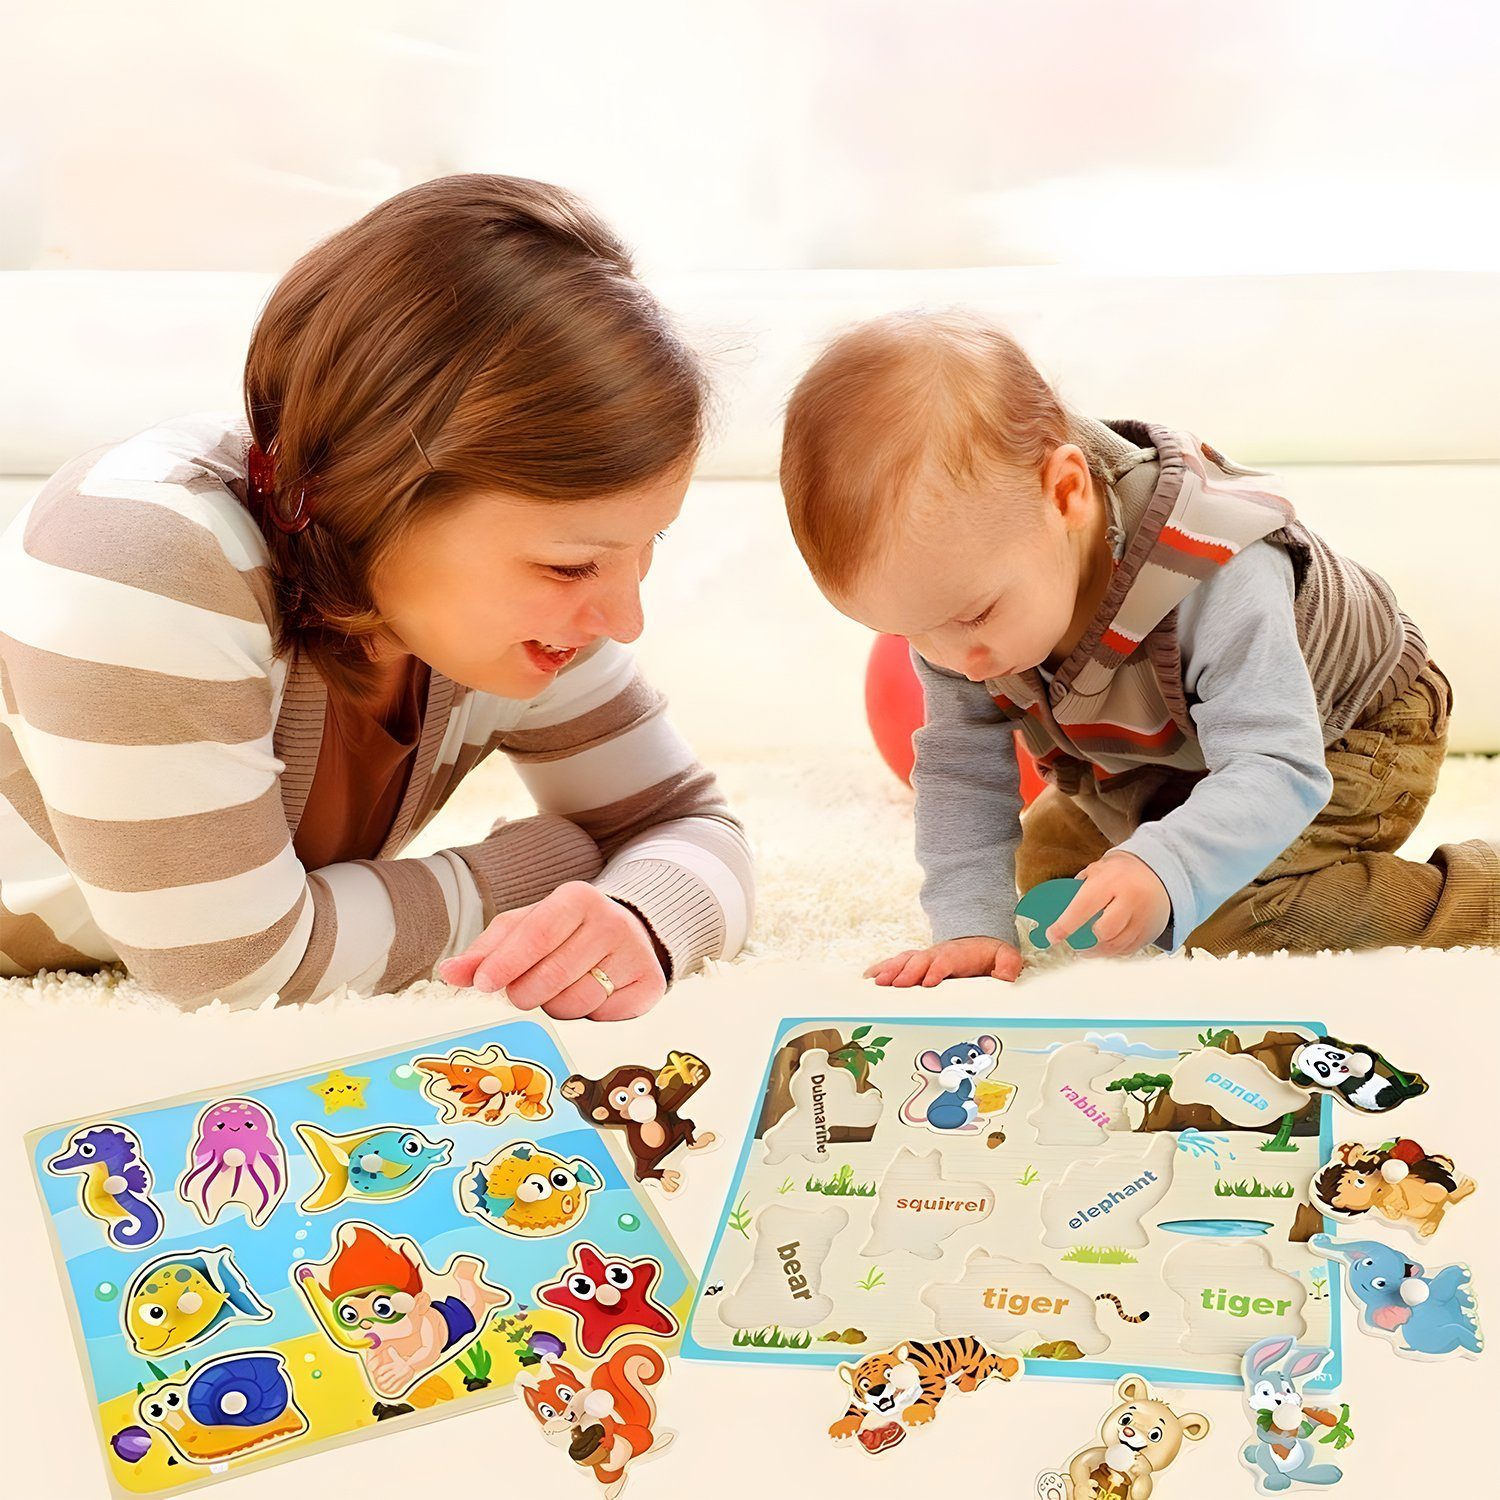 2IN1 KINDER HOLZPUZZLE 8 Teile Fisher-Price Holz Puzzle Puzzles Spiel Spiele 